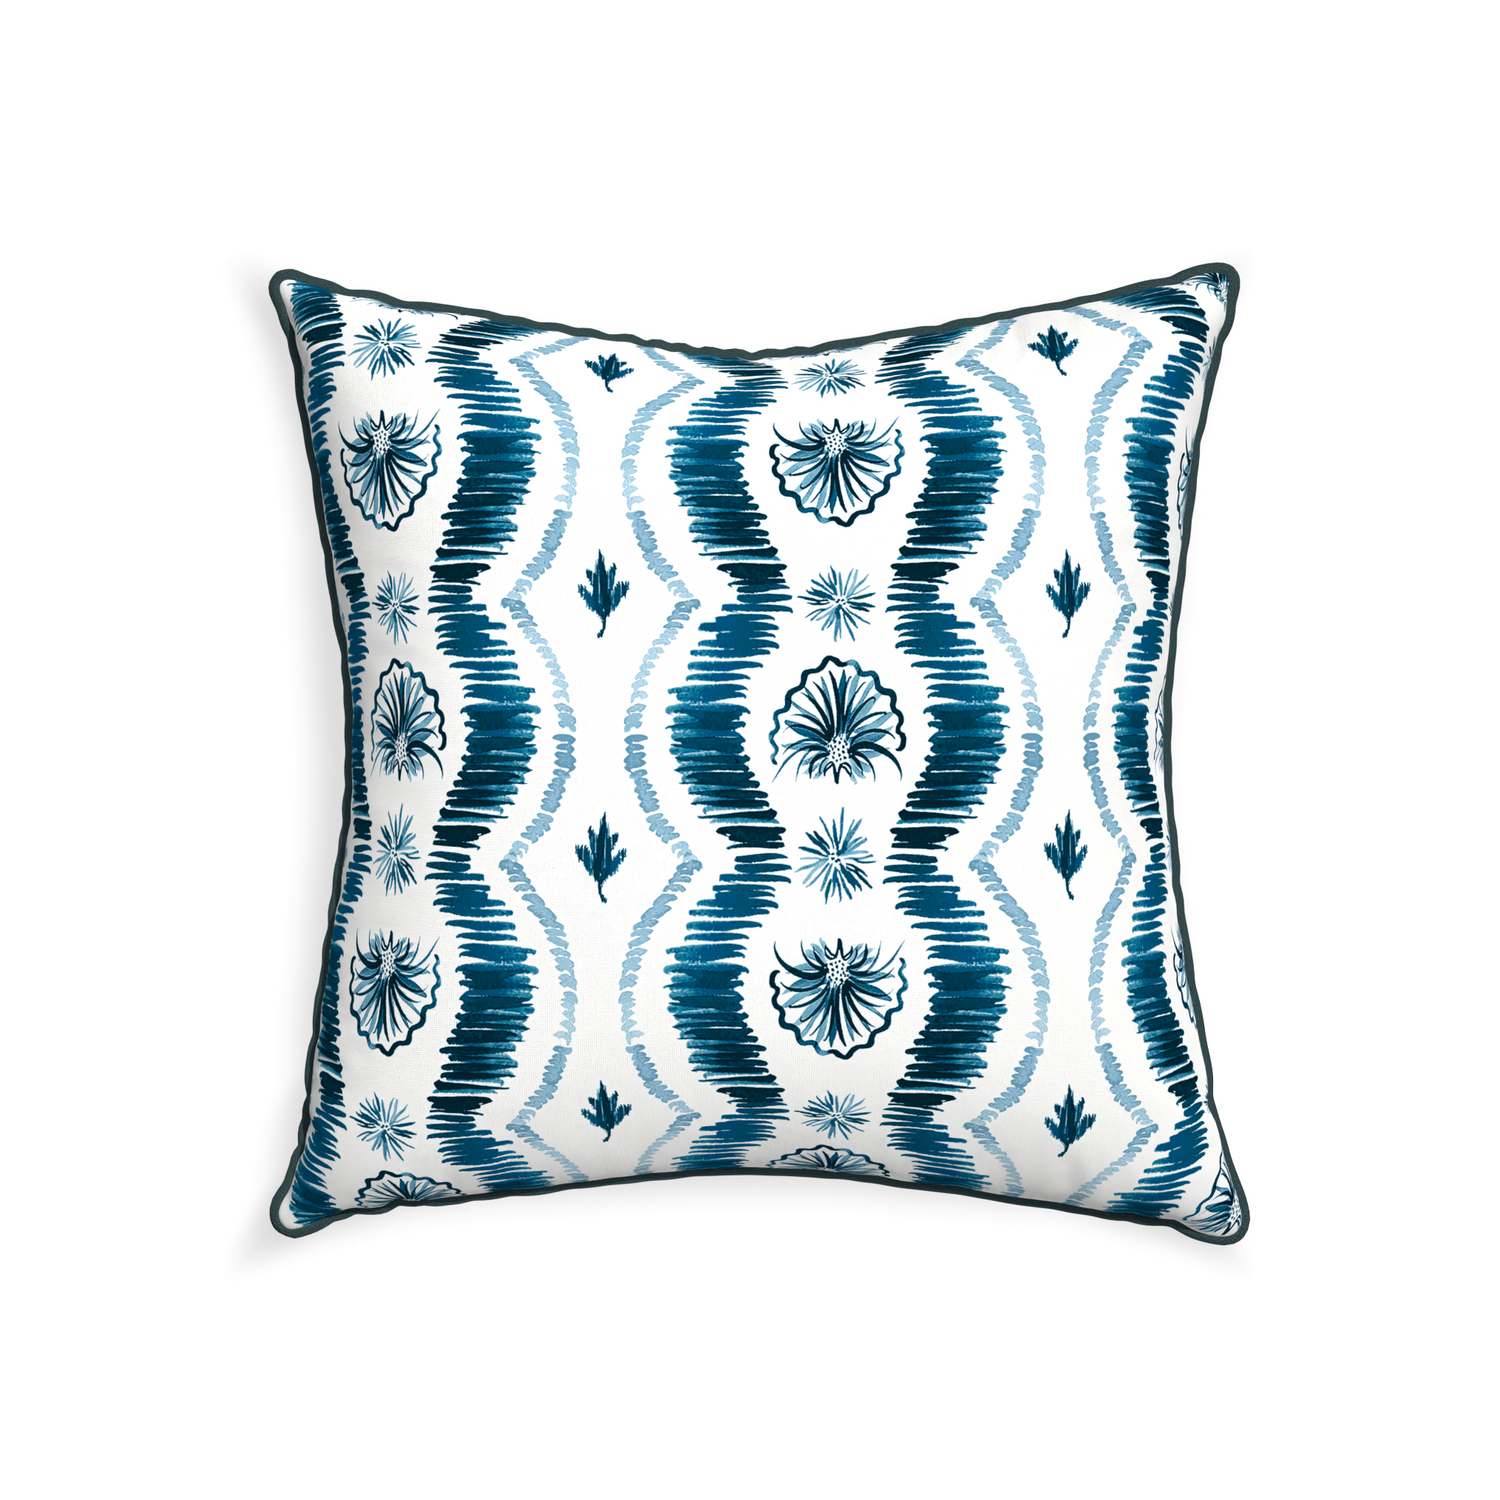 22-square alice custom blue ikatpillow with p piping on white background